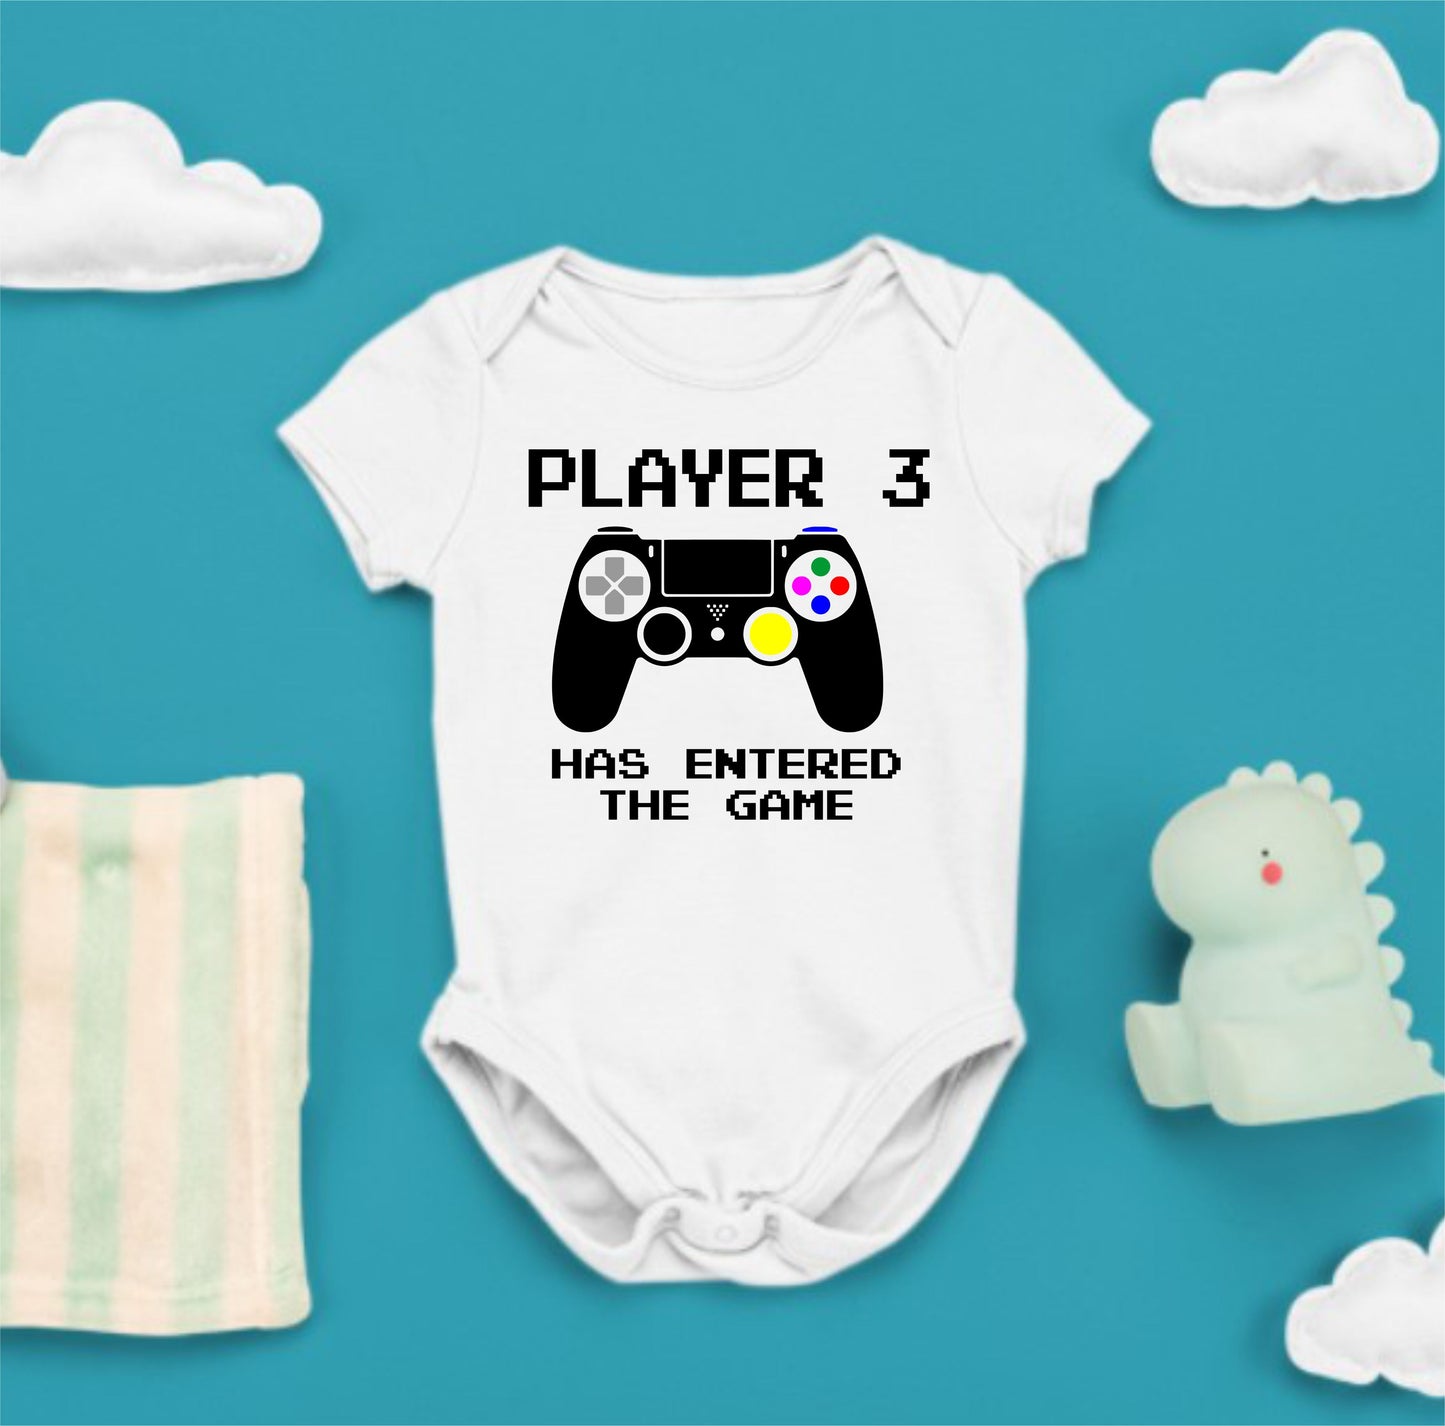 Baby Statement Onesies - Player 3 has entered the game